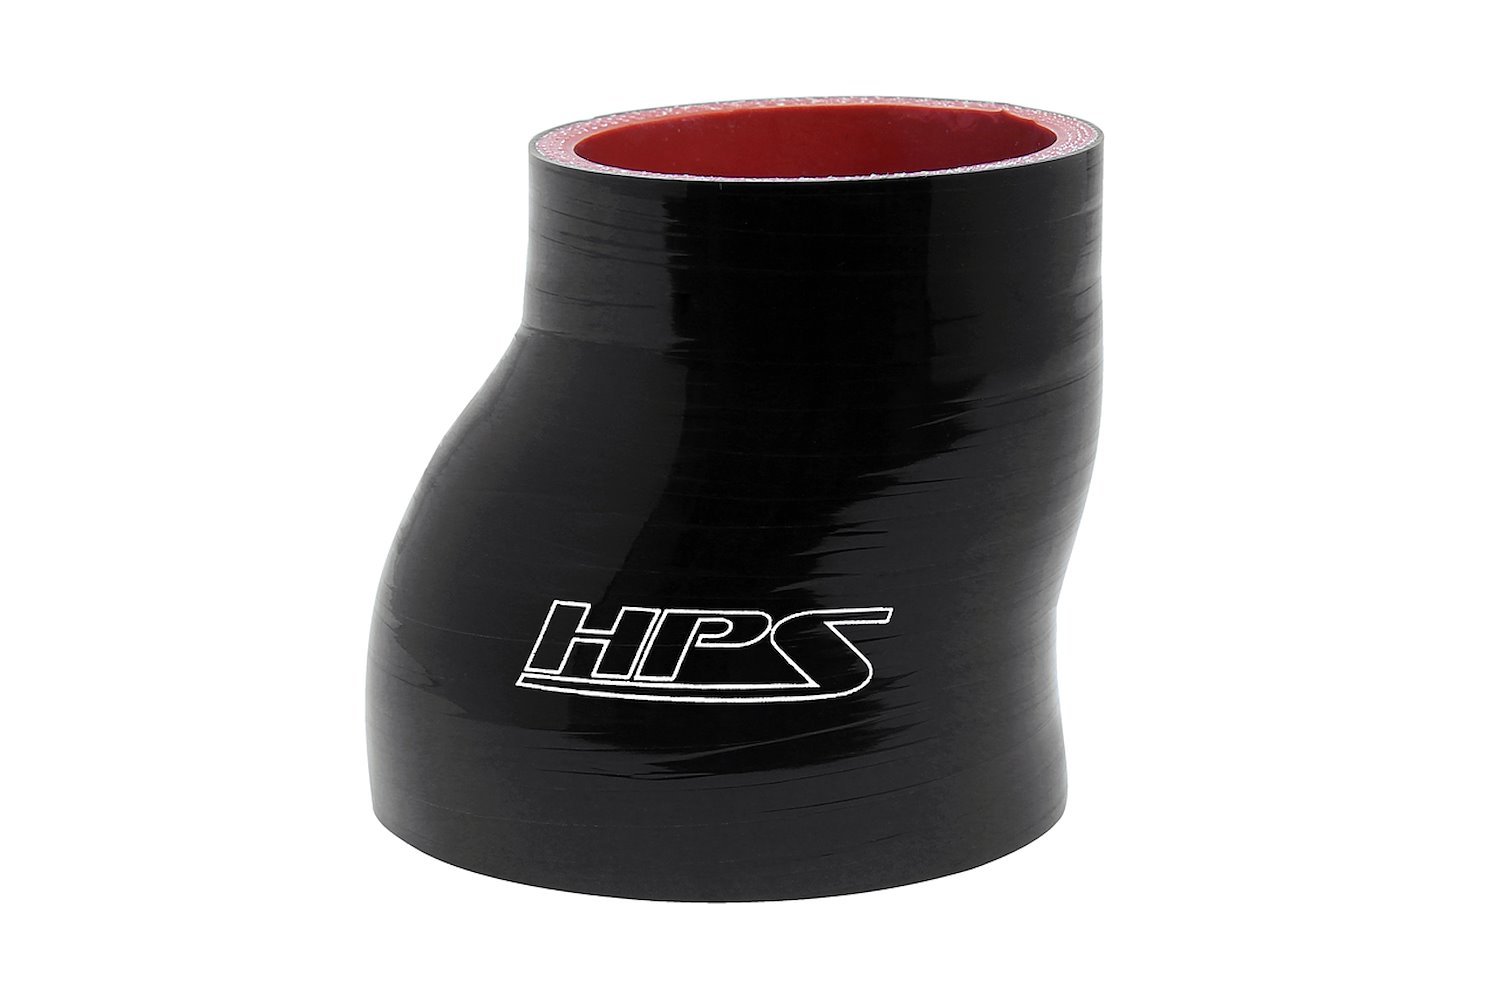 HTSOR-300-350-BLK Silicone Offset Reducer Hose, High-Temp Reinforced, 3 in. - 3-1/2 in. ID, 3 in. Long, Black